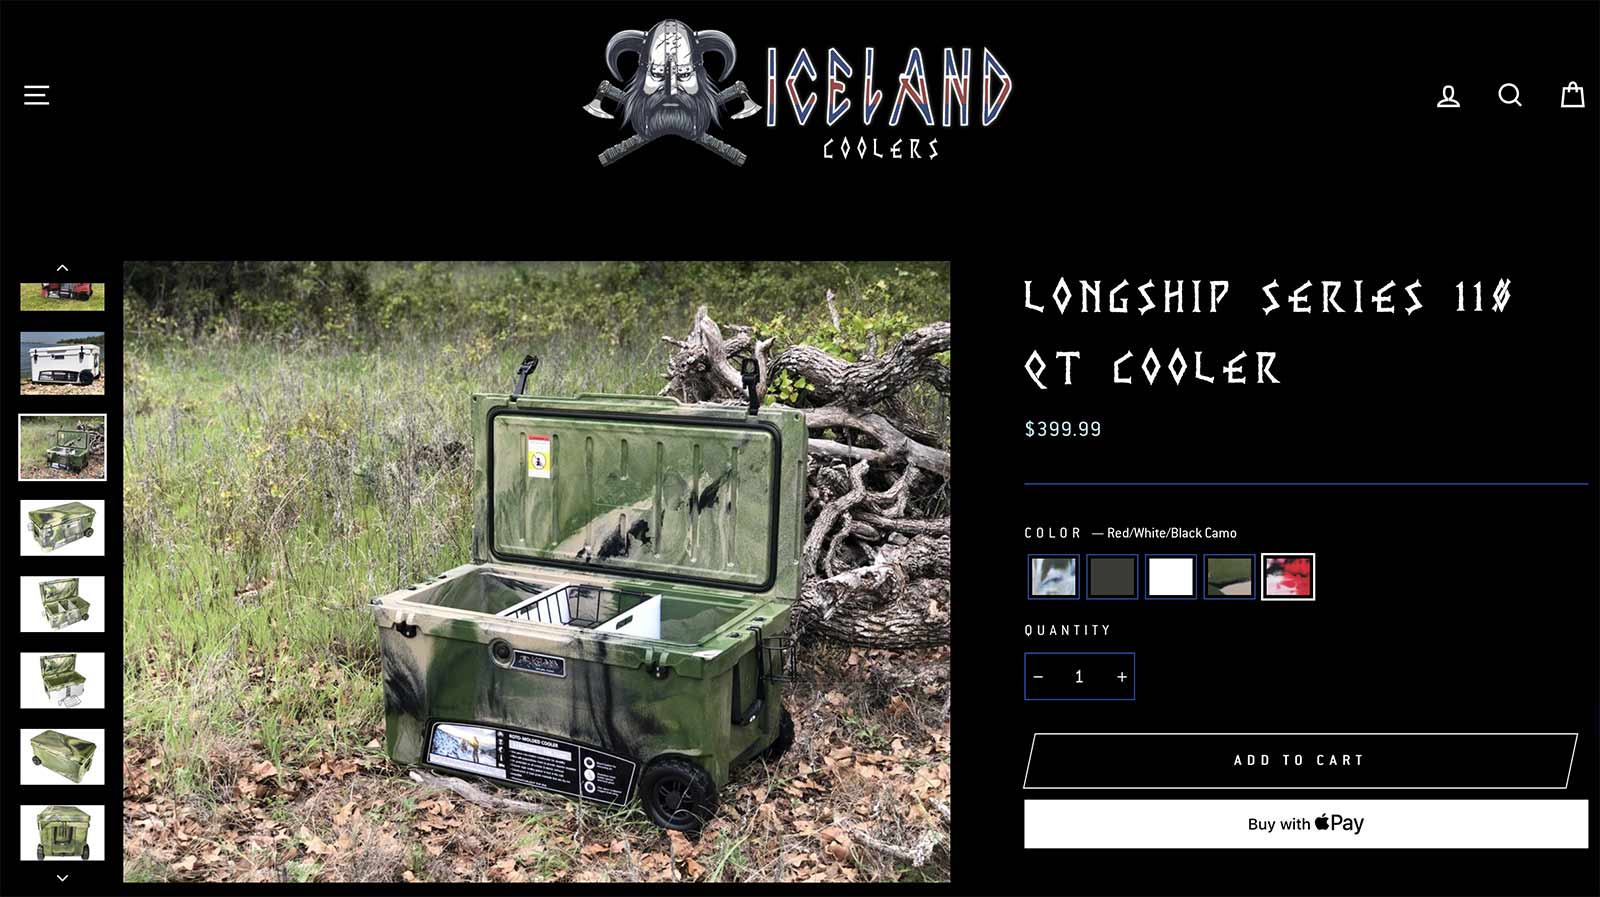 Iceland Coolers product page